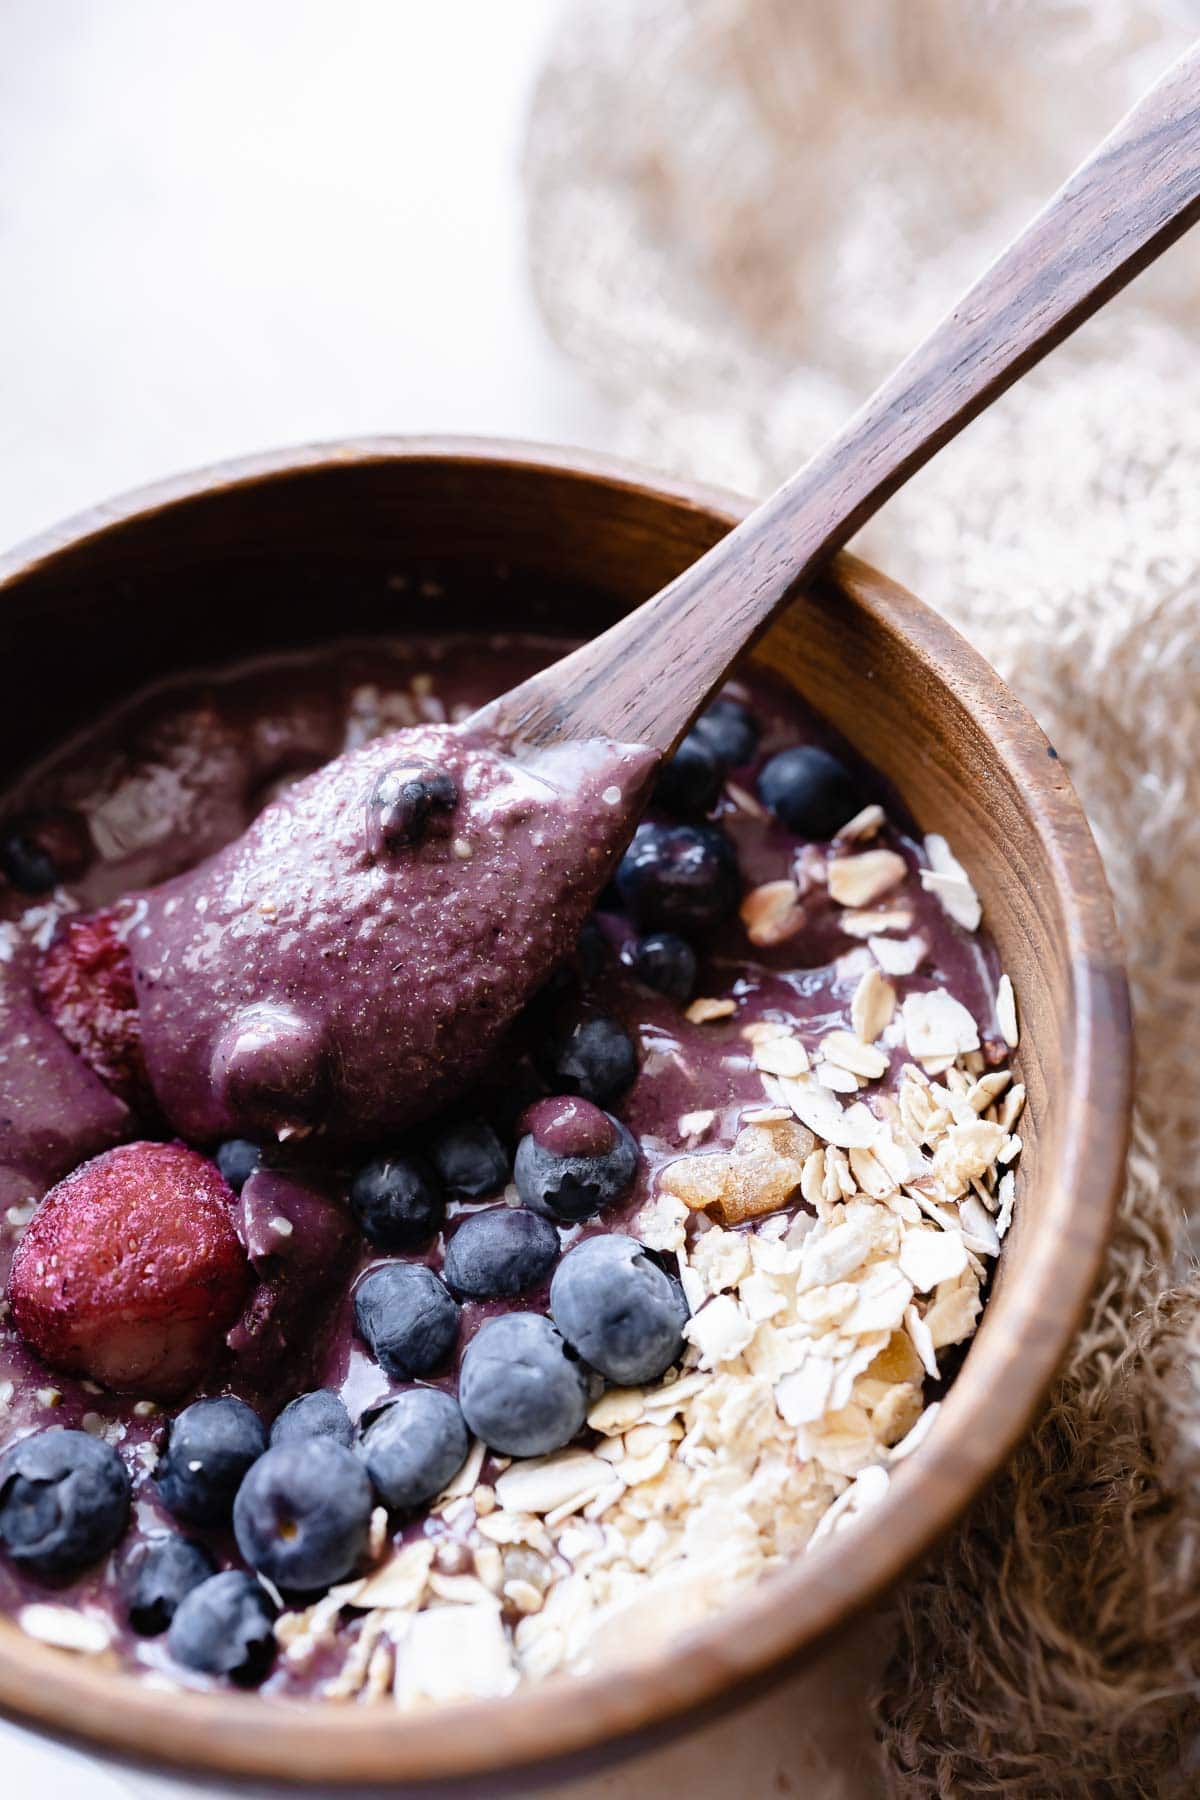 Easy Acai Bowl Recipe - MOON and spoon and yum